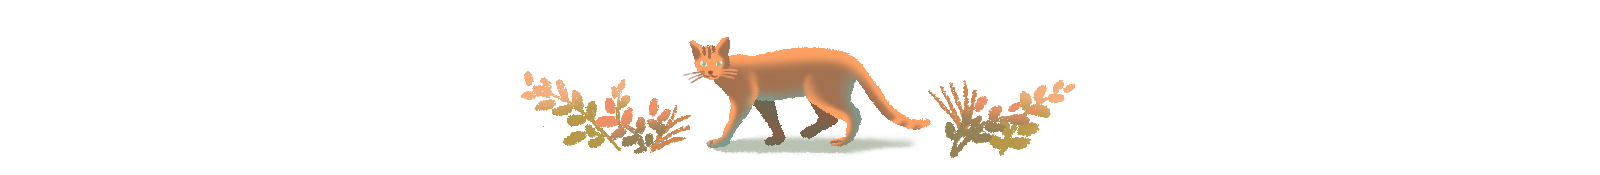 Illustration of lynx used to divide story text